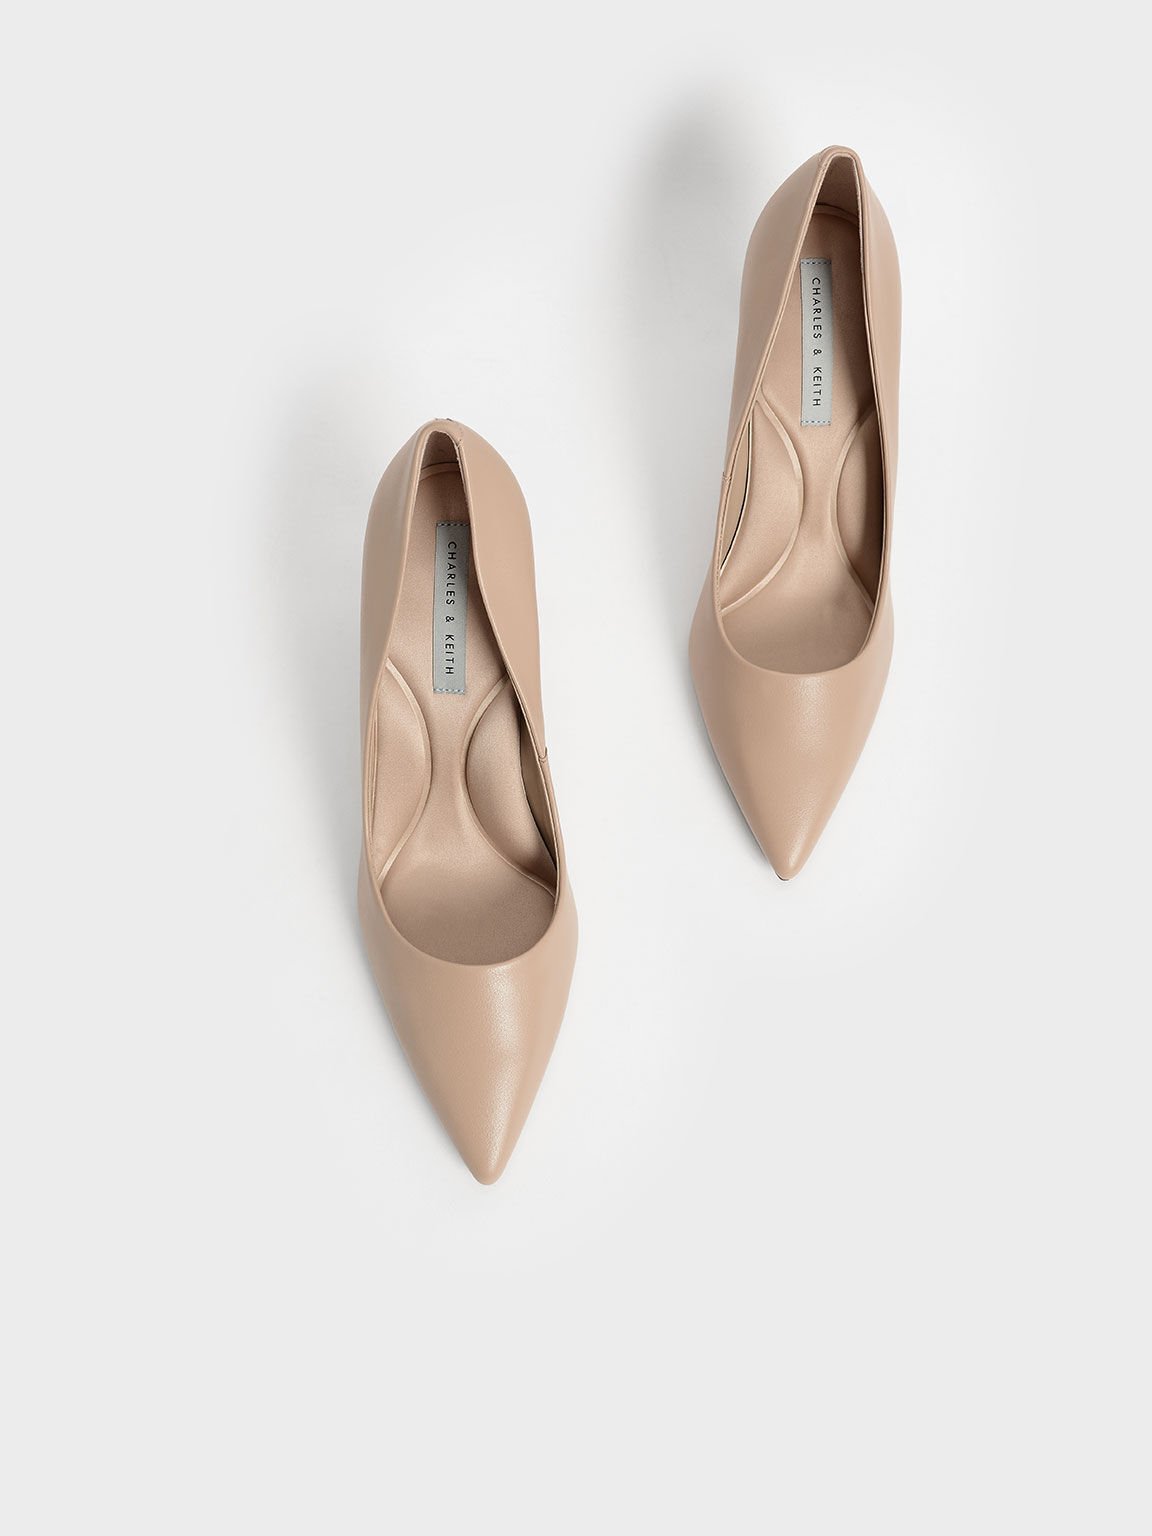 Emmy Pointed-Toe Pumps, Nude, hi-res